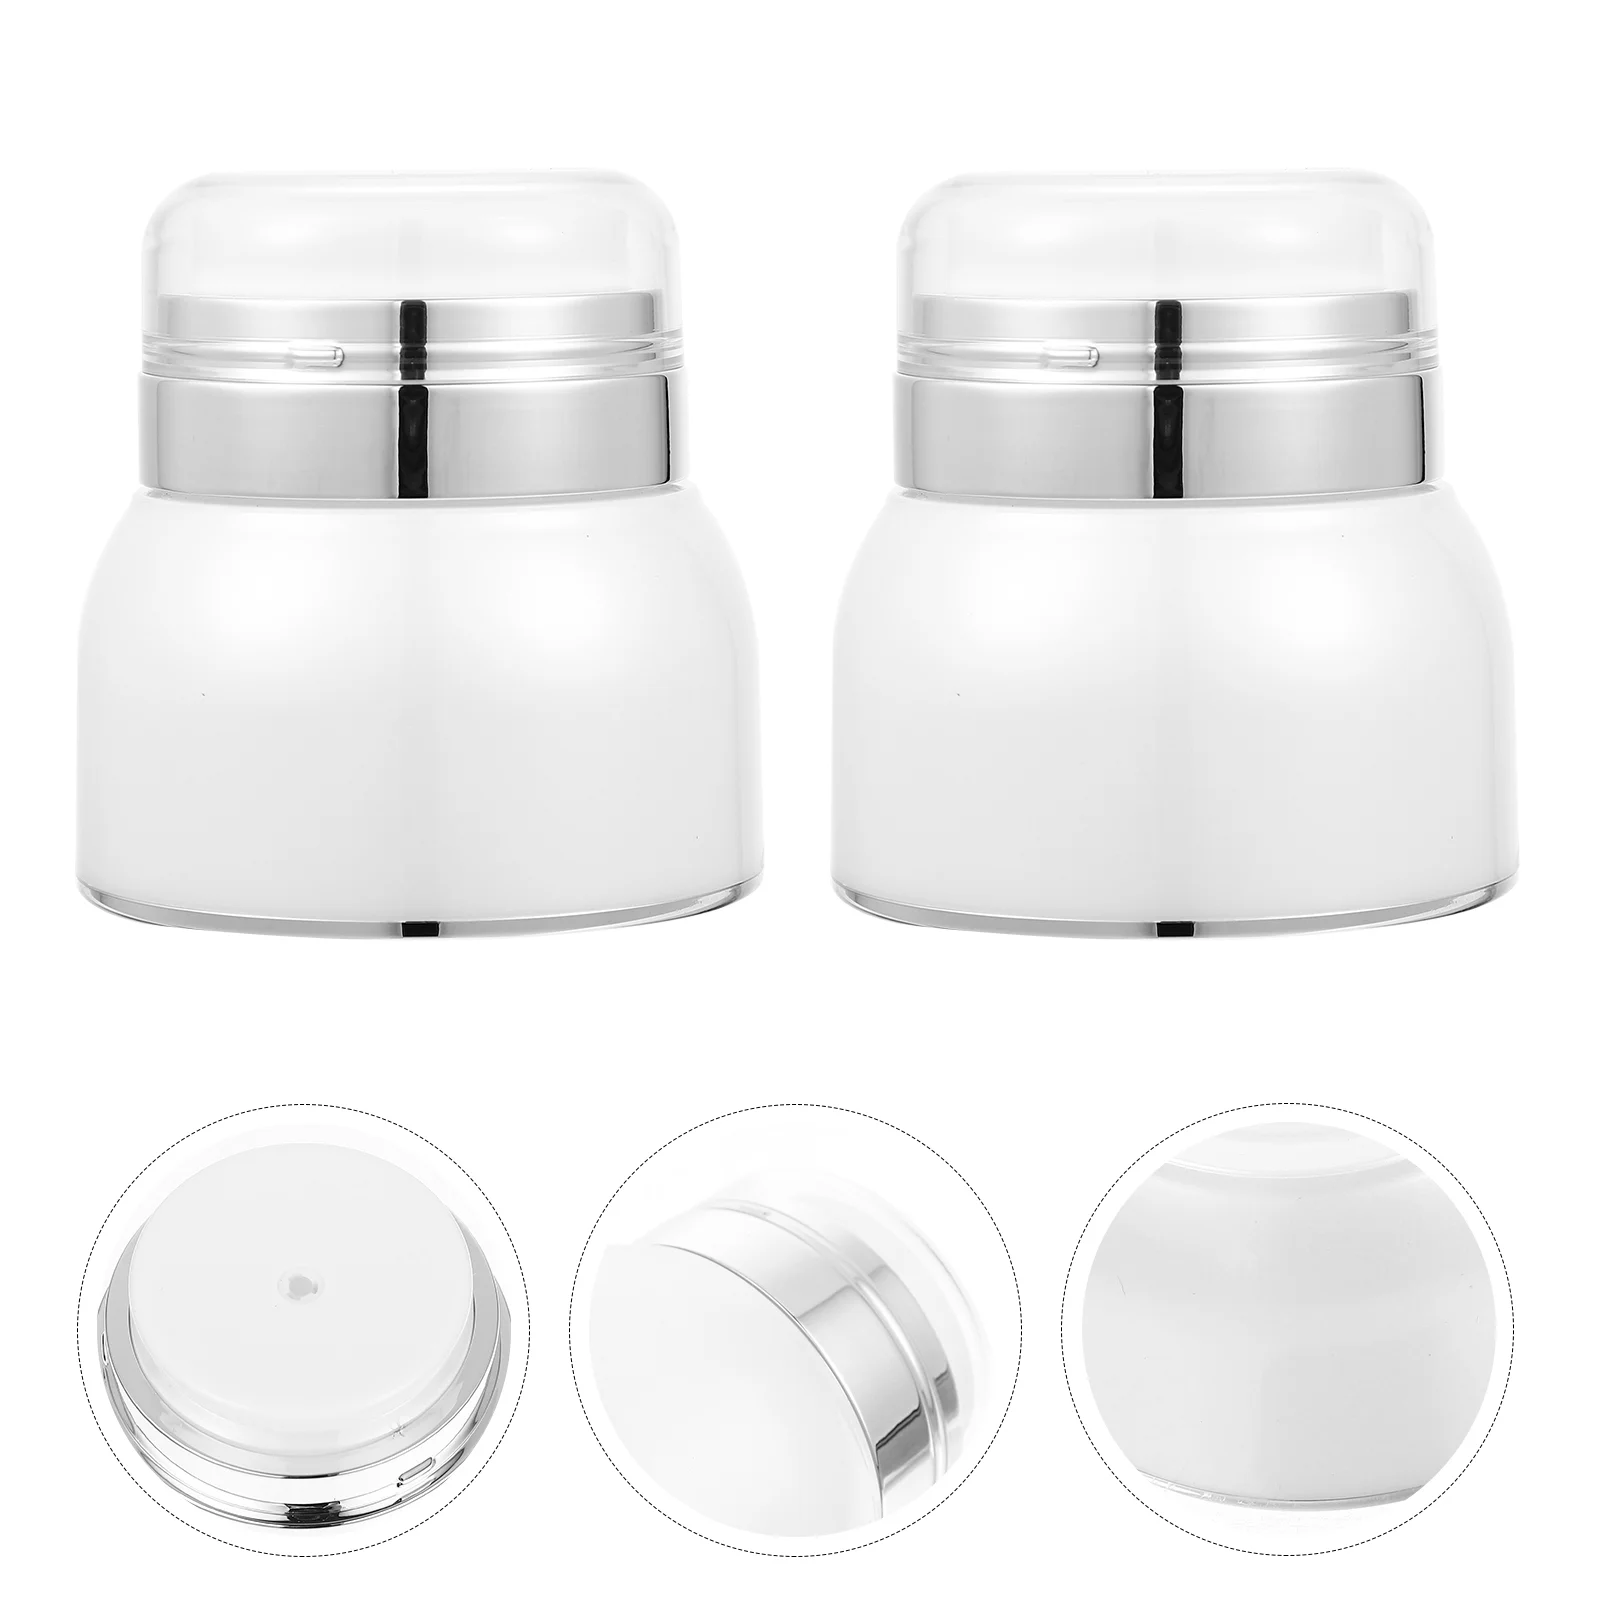 Pump Airless Bottle Jar Lotion Cream Container Travel Jars Bottles Containers Vacuum Empty Makeup Refillable Dispenser Acrylic